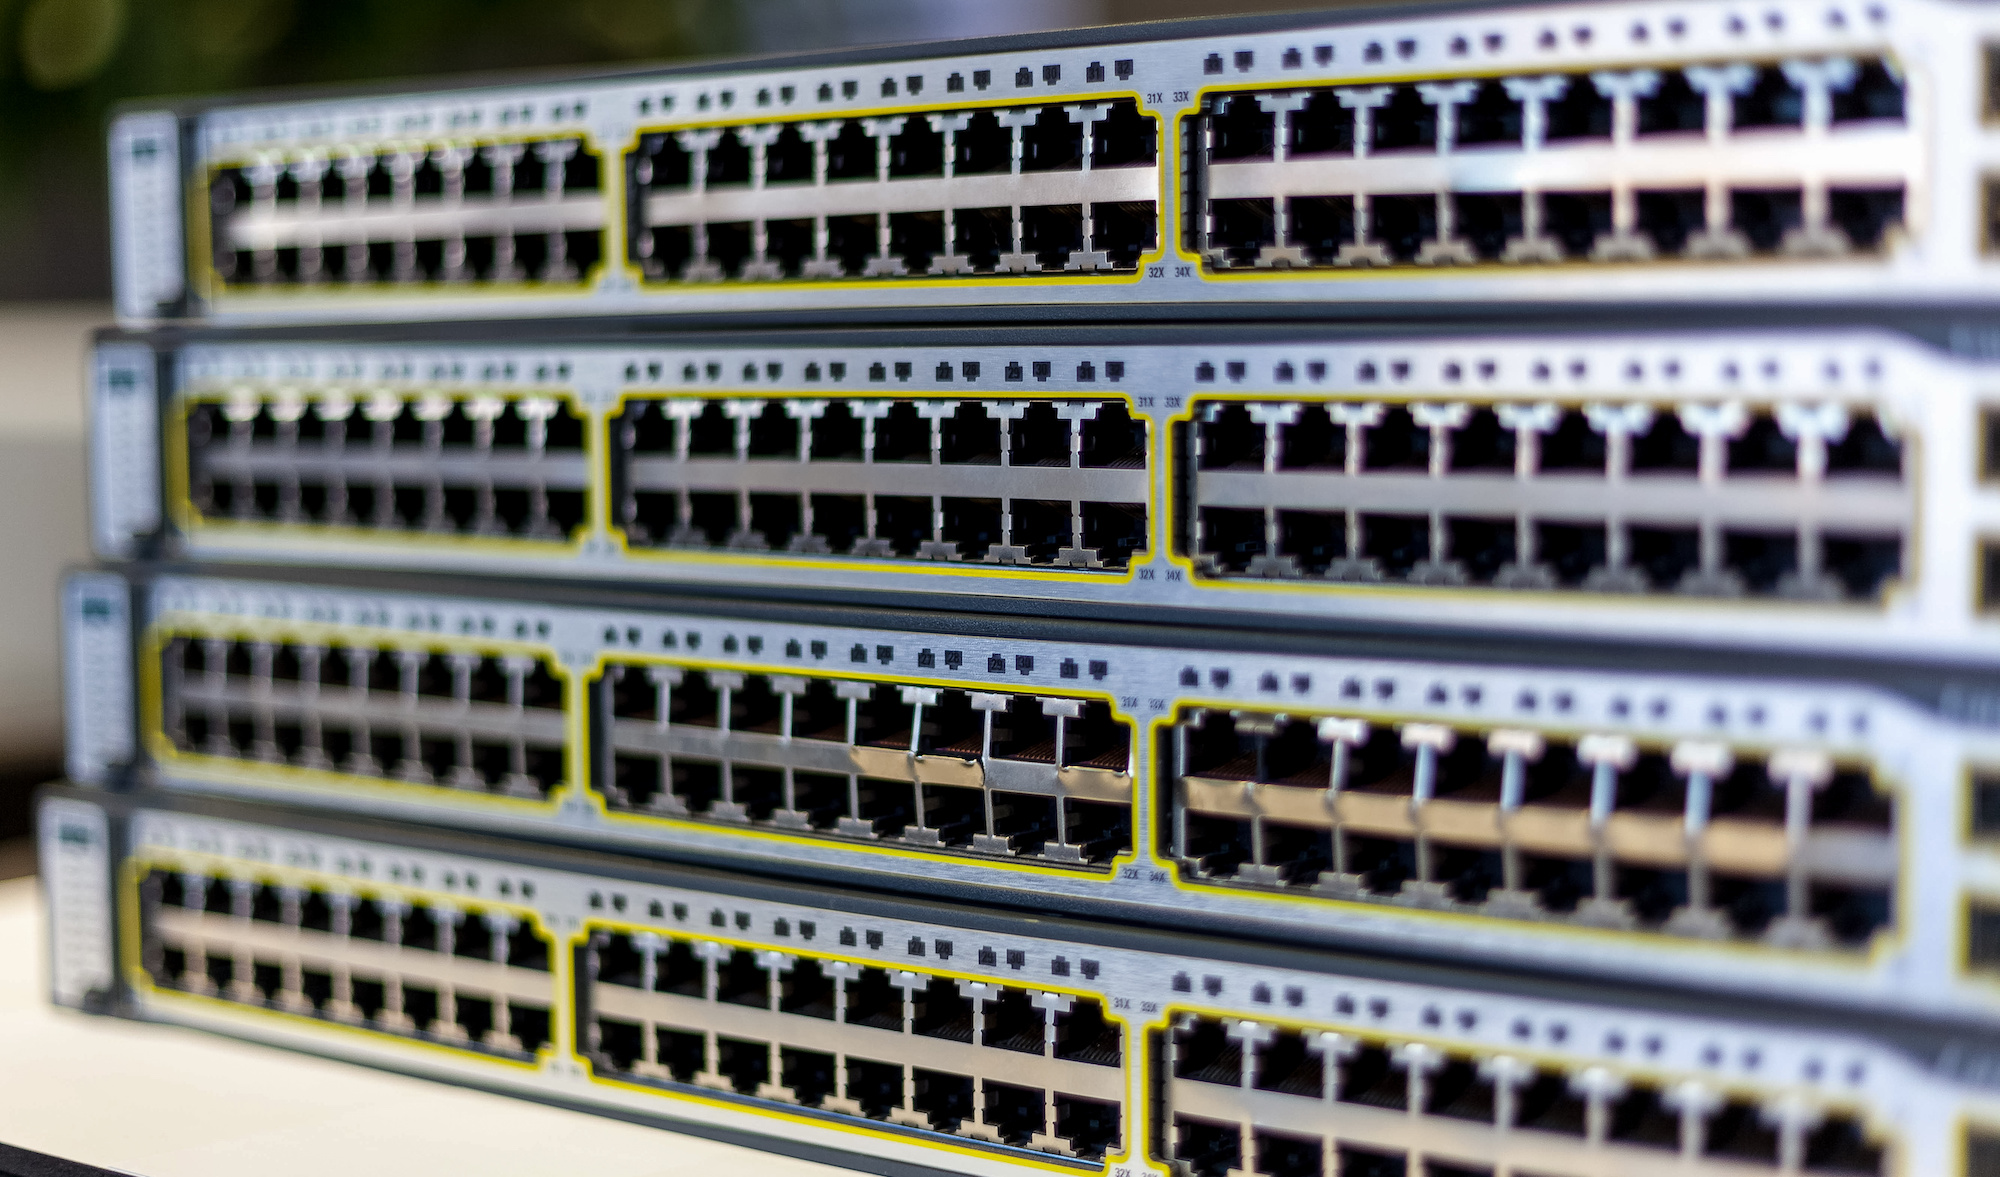 Key Features of Cisco Catalyst Switches